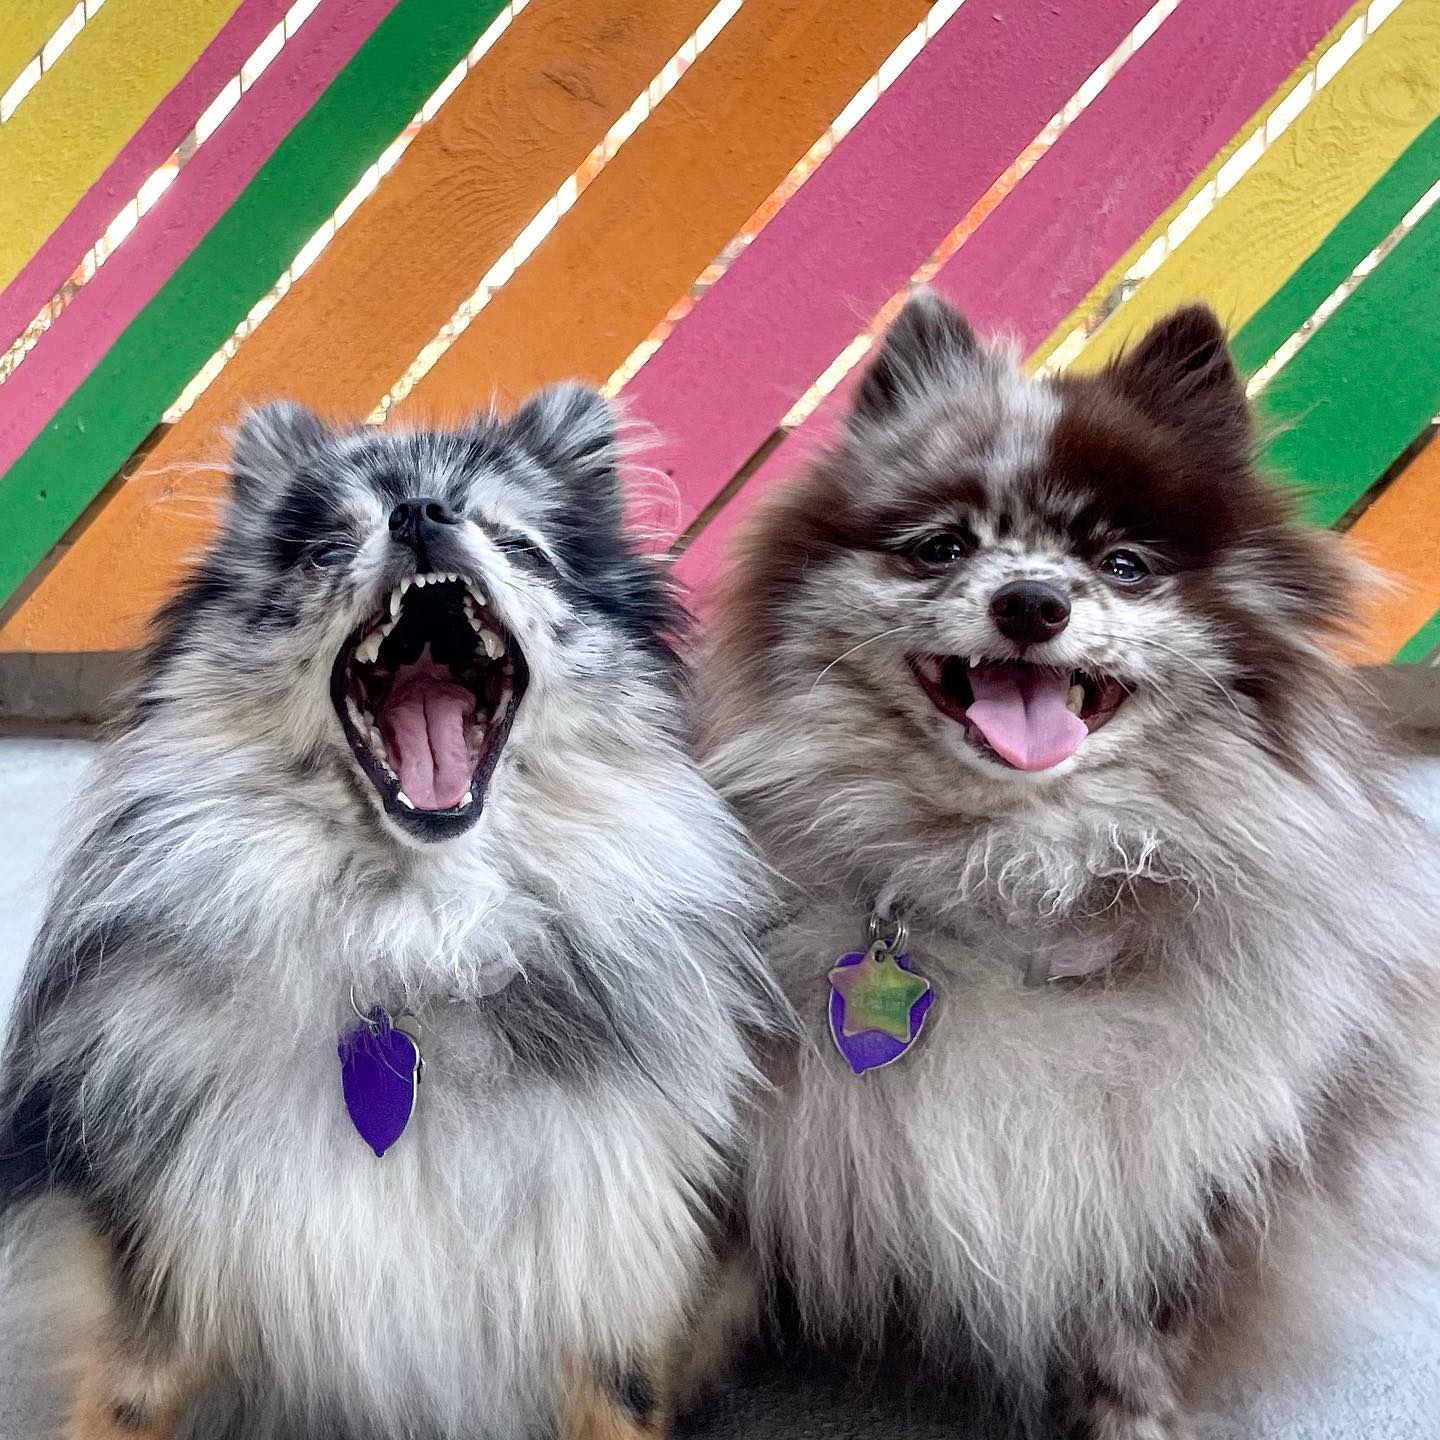 Two Pomeranians in front of a colorful wall